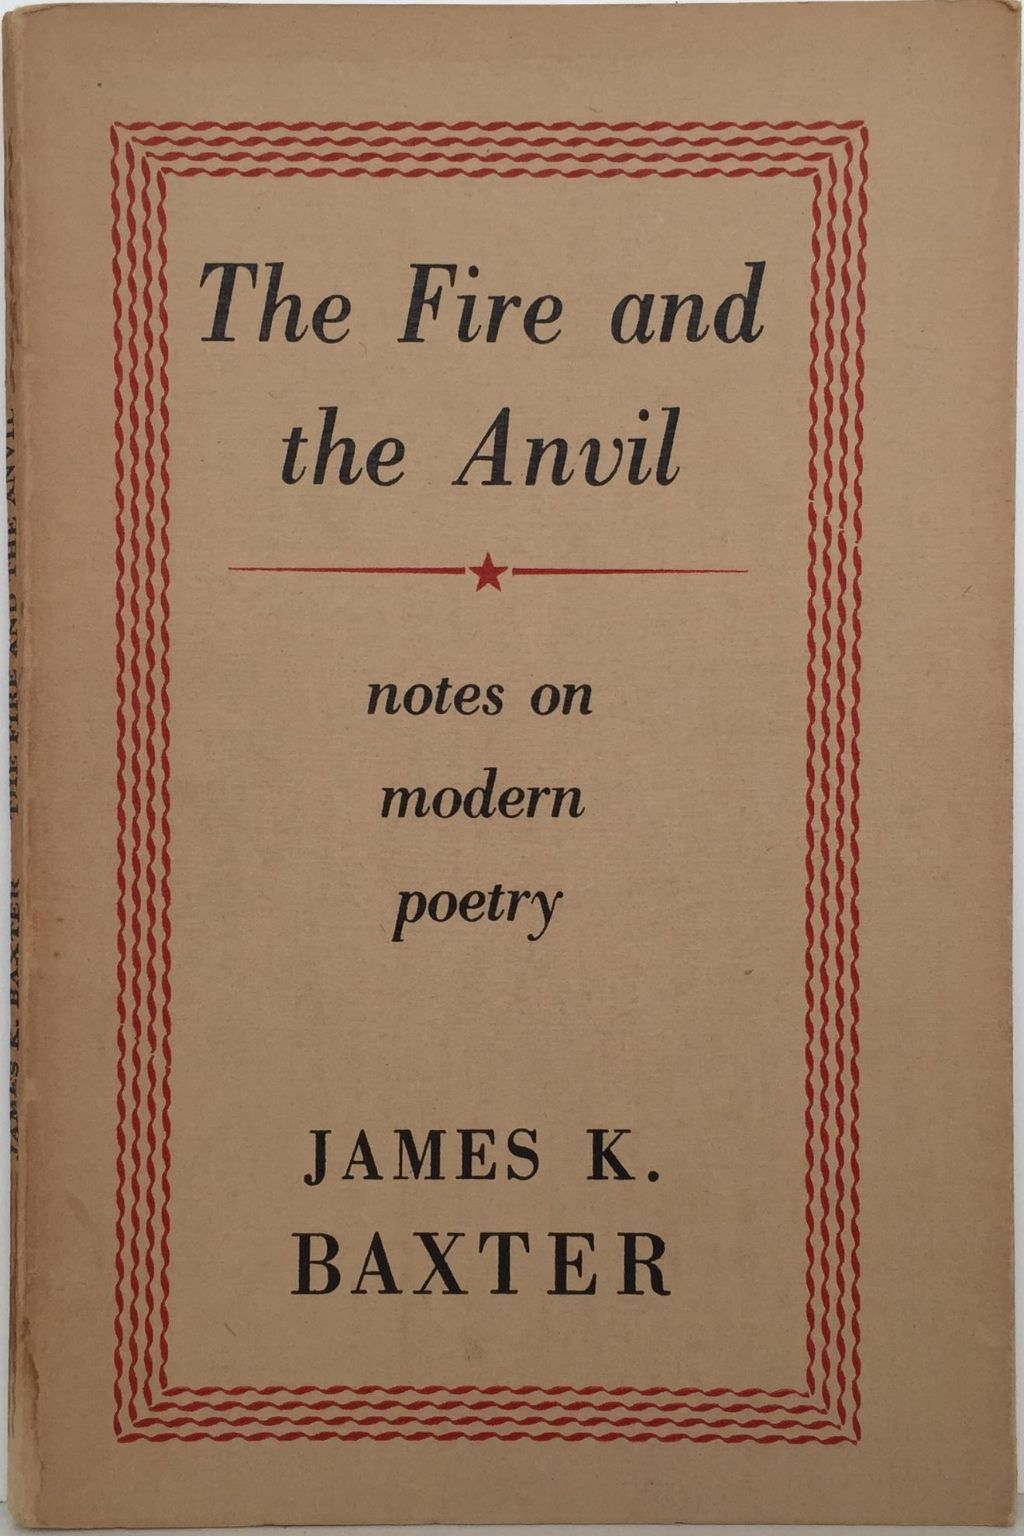 THE FIRE AND THE ANVIL: Notes on Modern Poetry